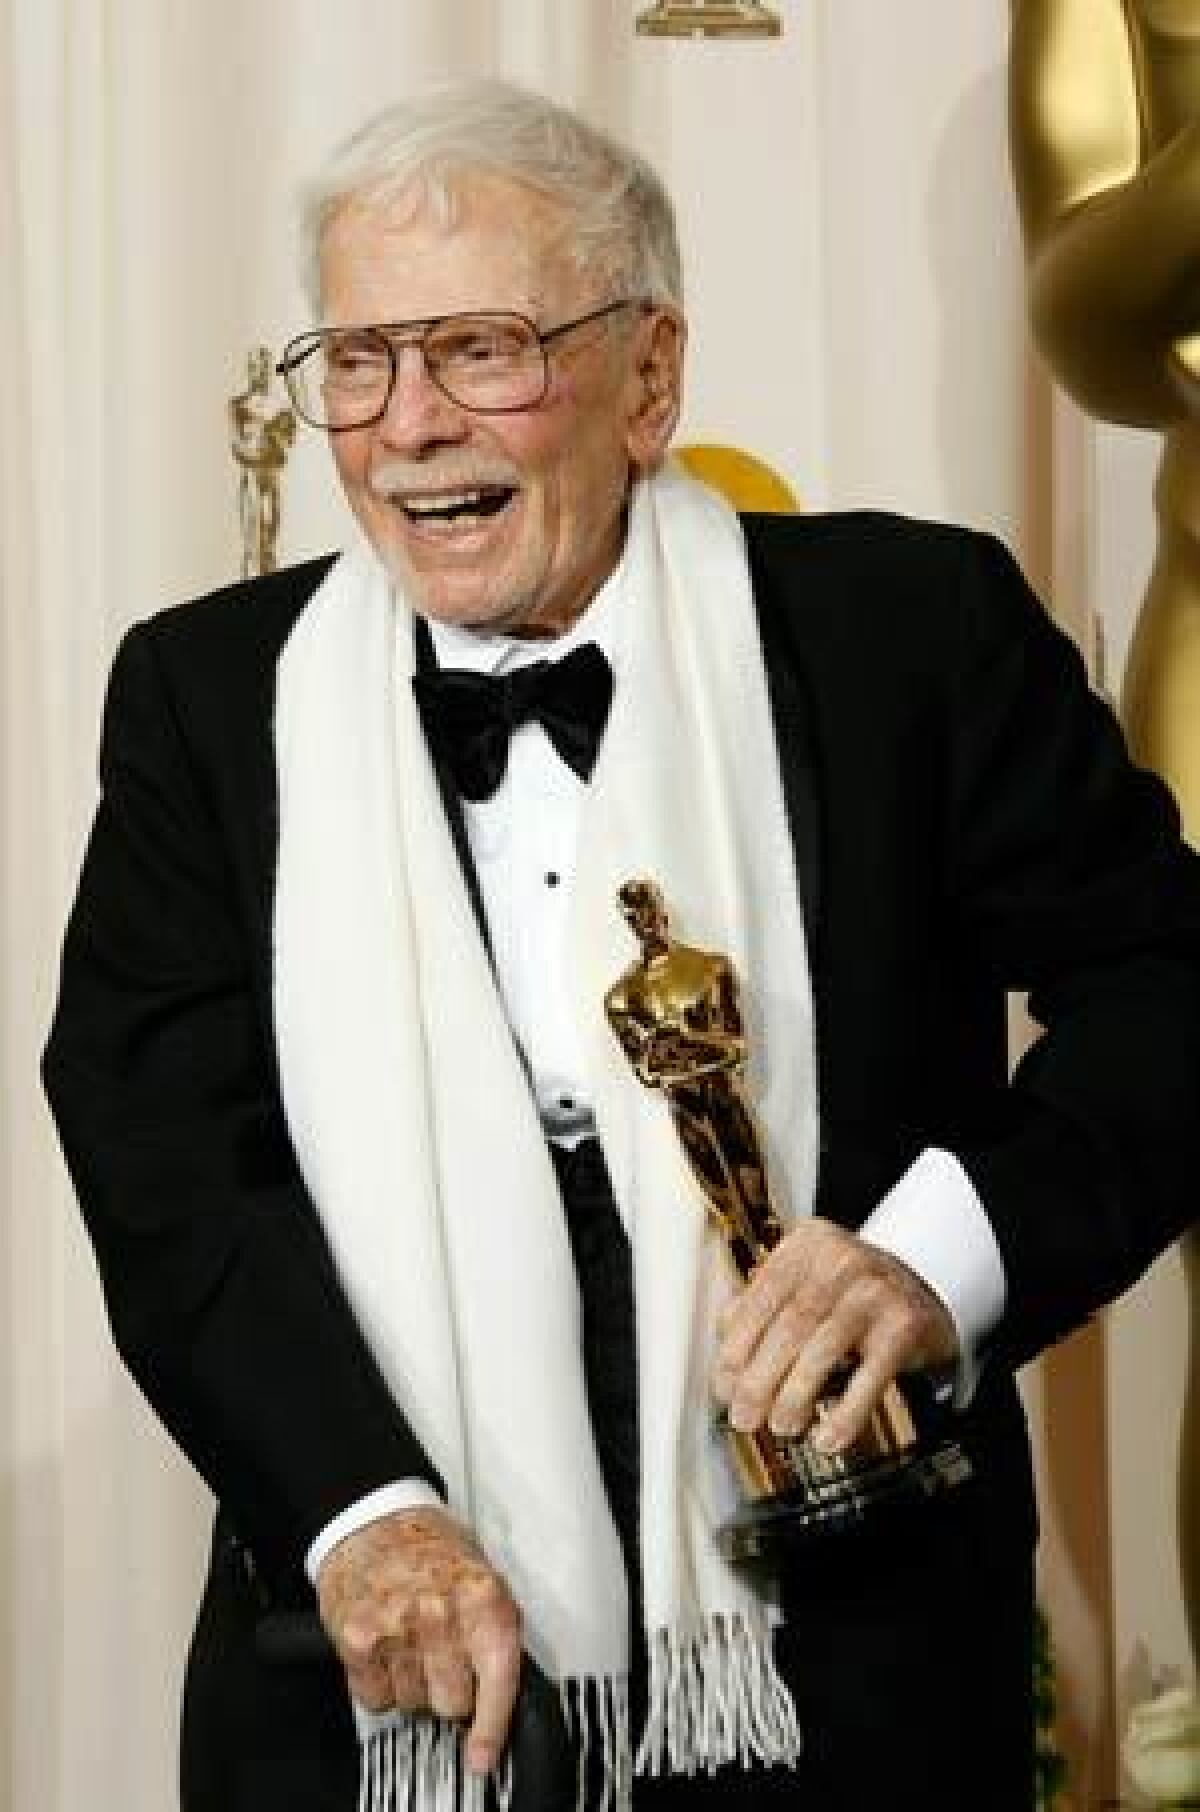 Robert F. Boyle, who worked on more than 100 films during a career that spanned six decades, received an honorary Academy Award in 2008.